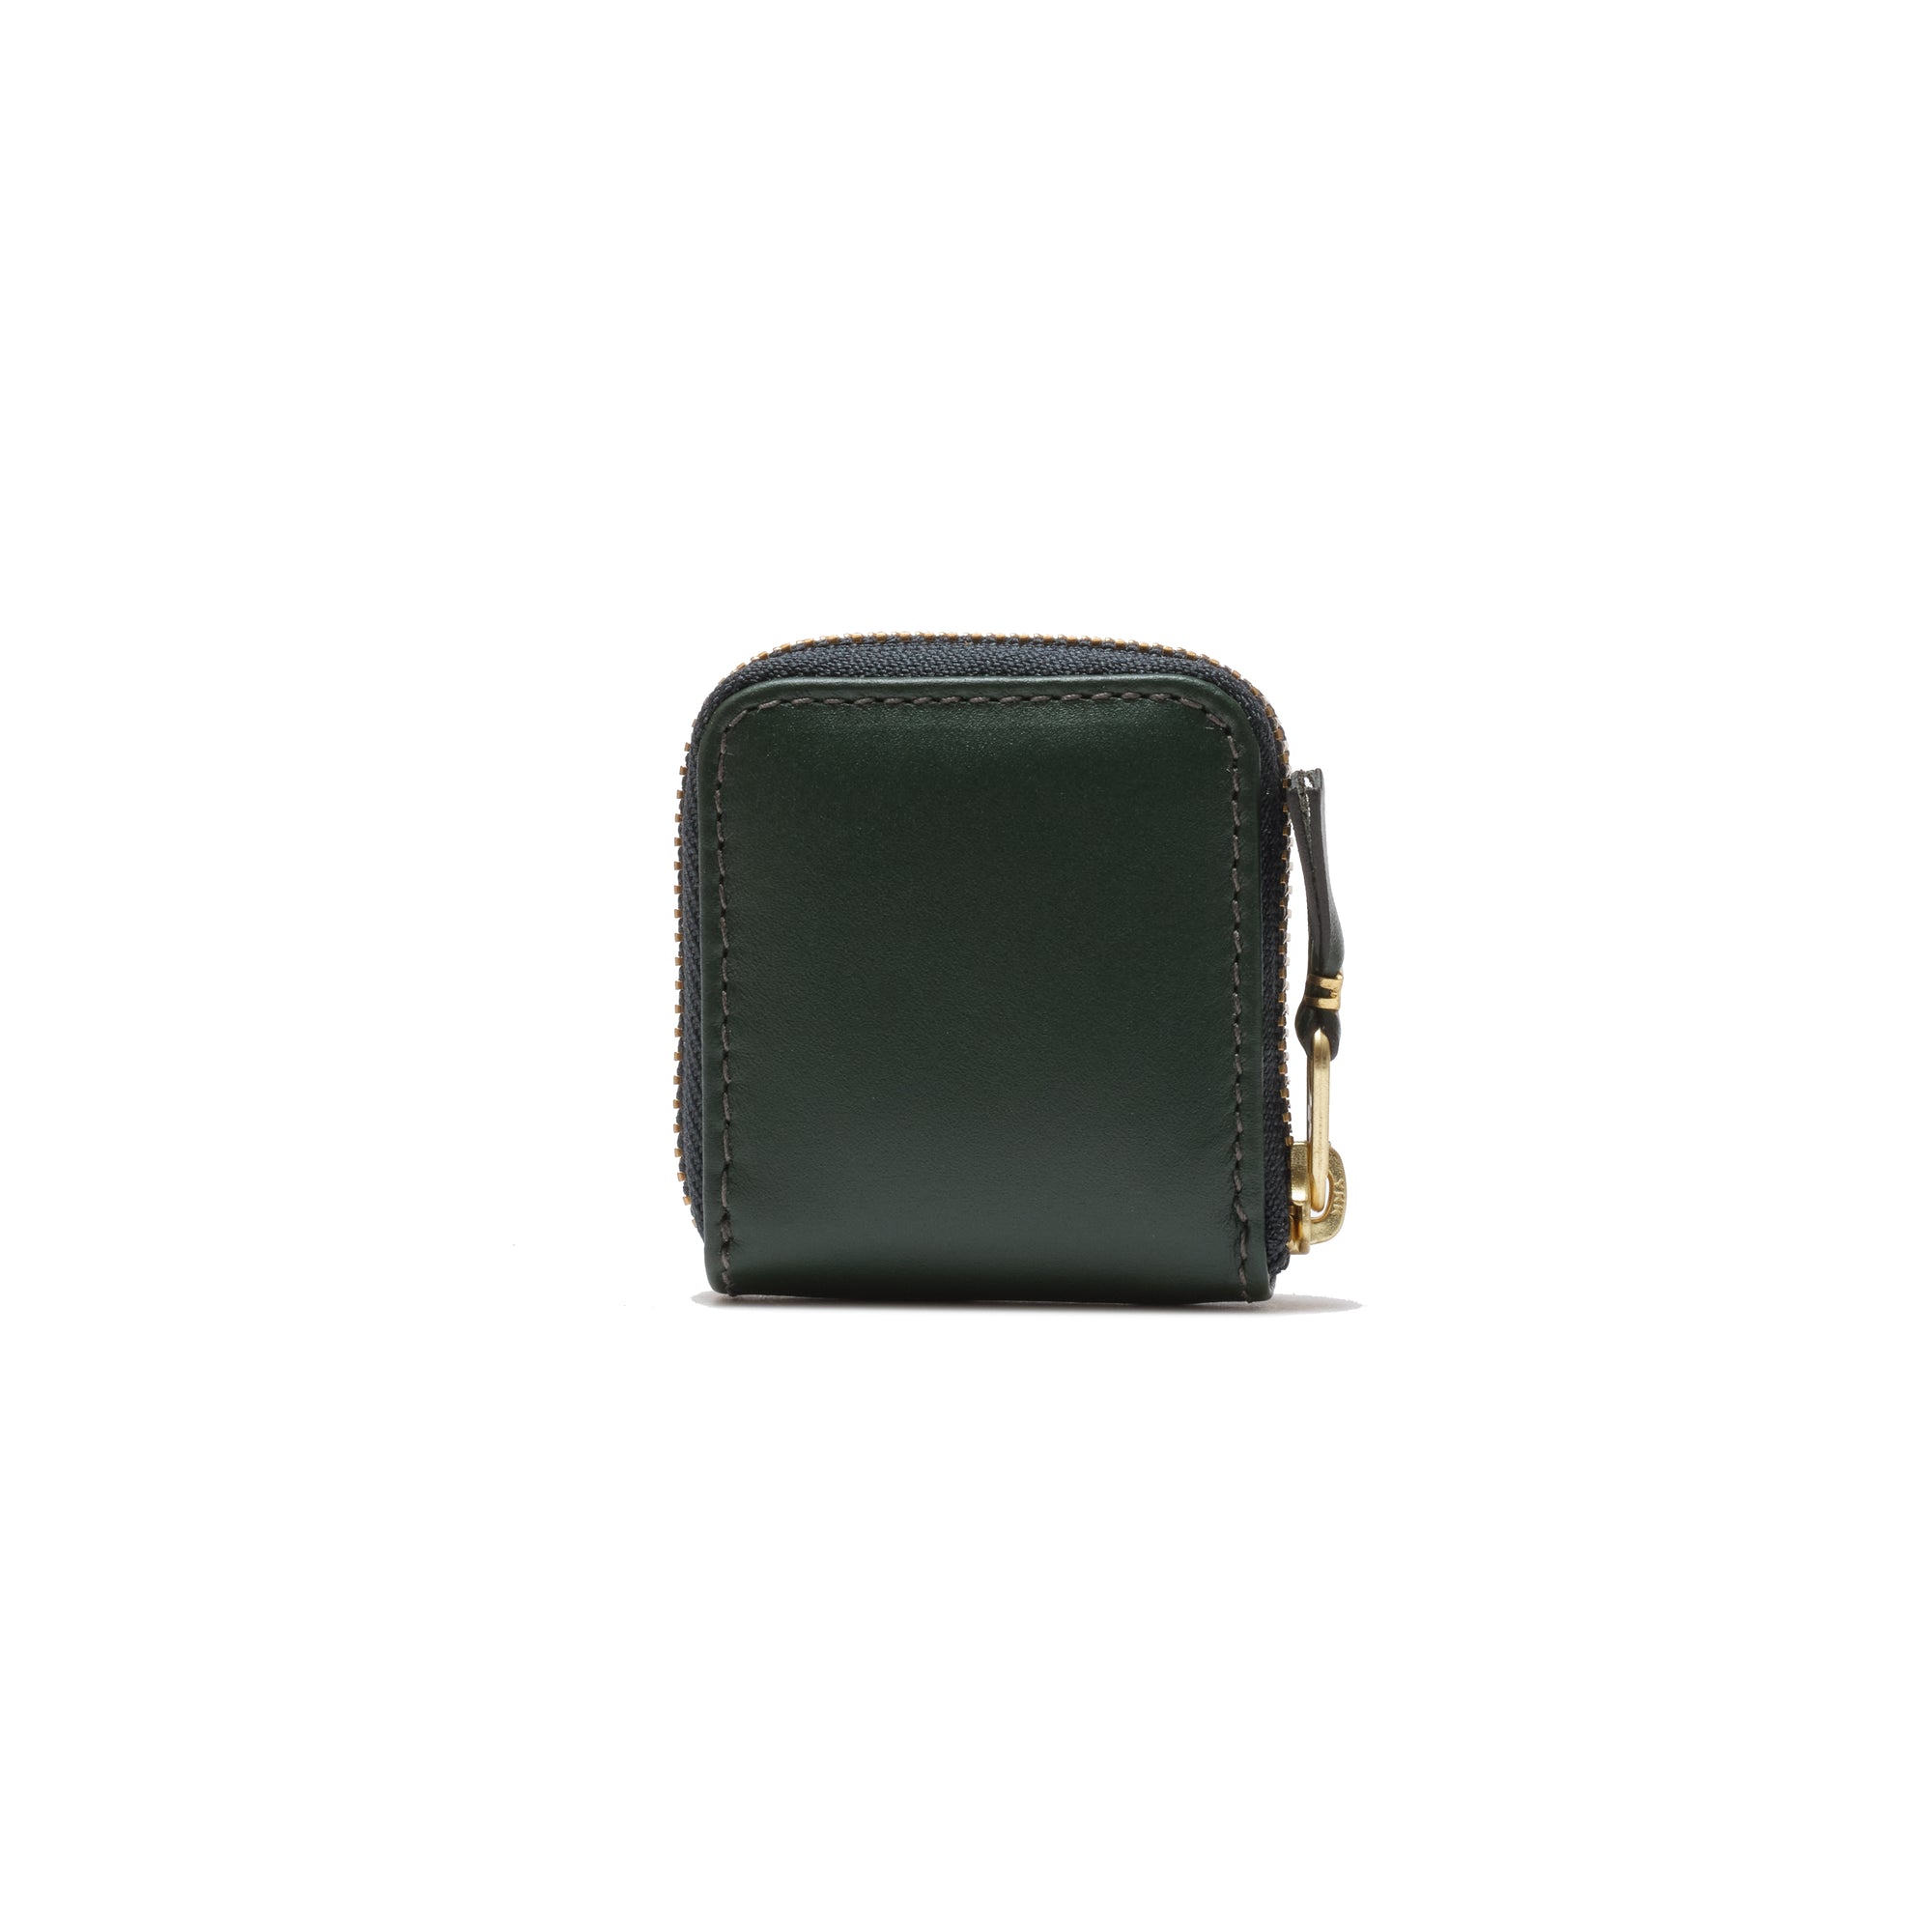 CDG WALLET - Classic Leather Line-8Z-D041 - (Bottle Green) view 2